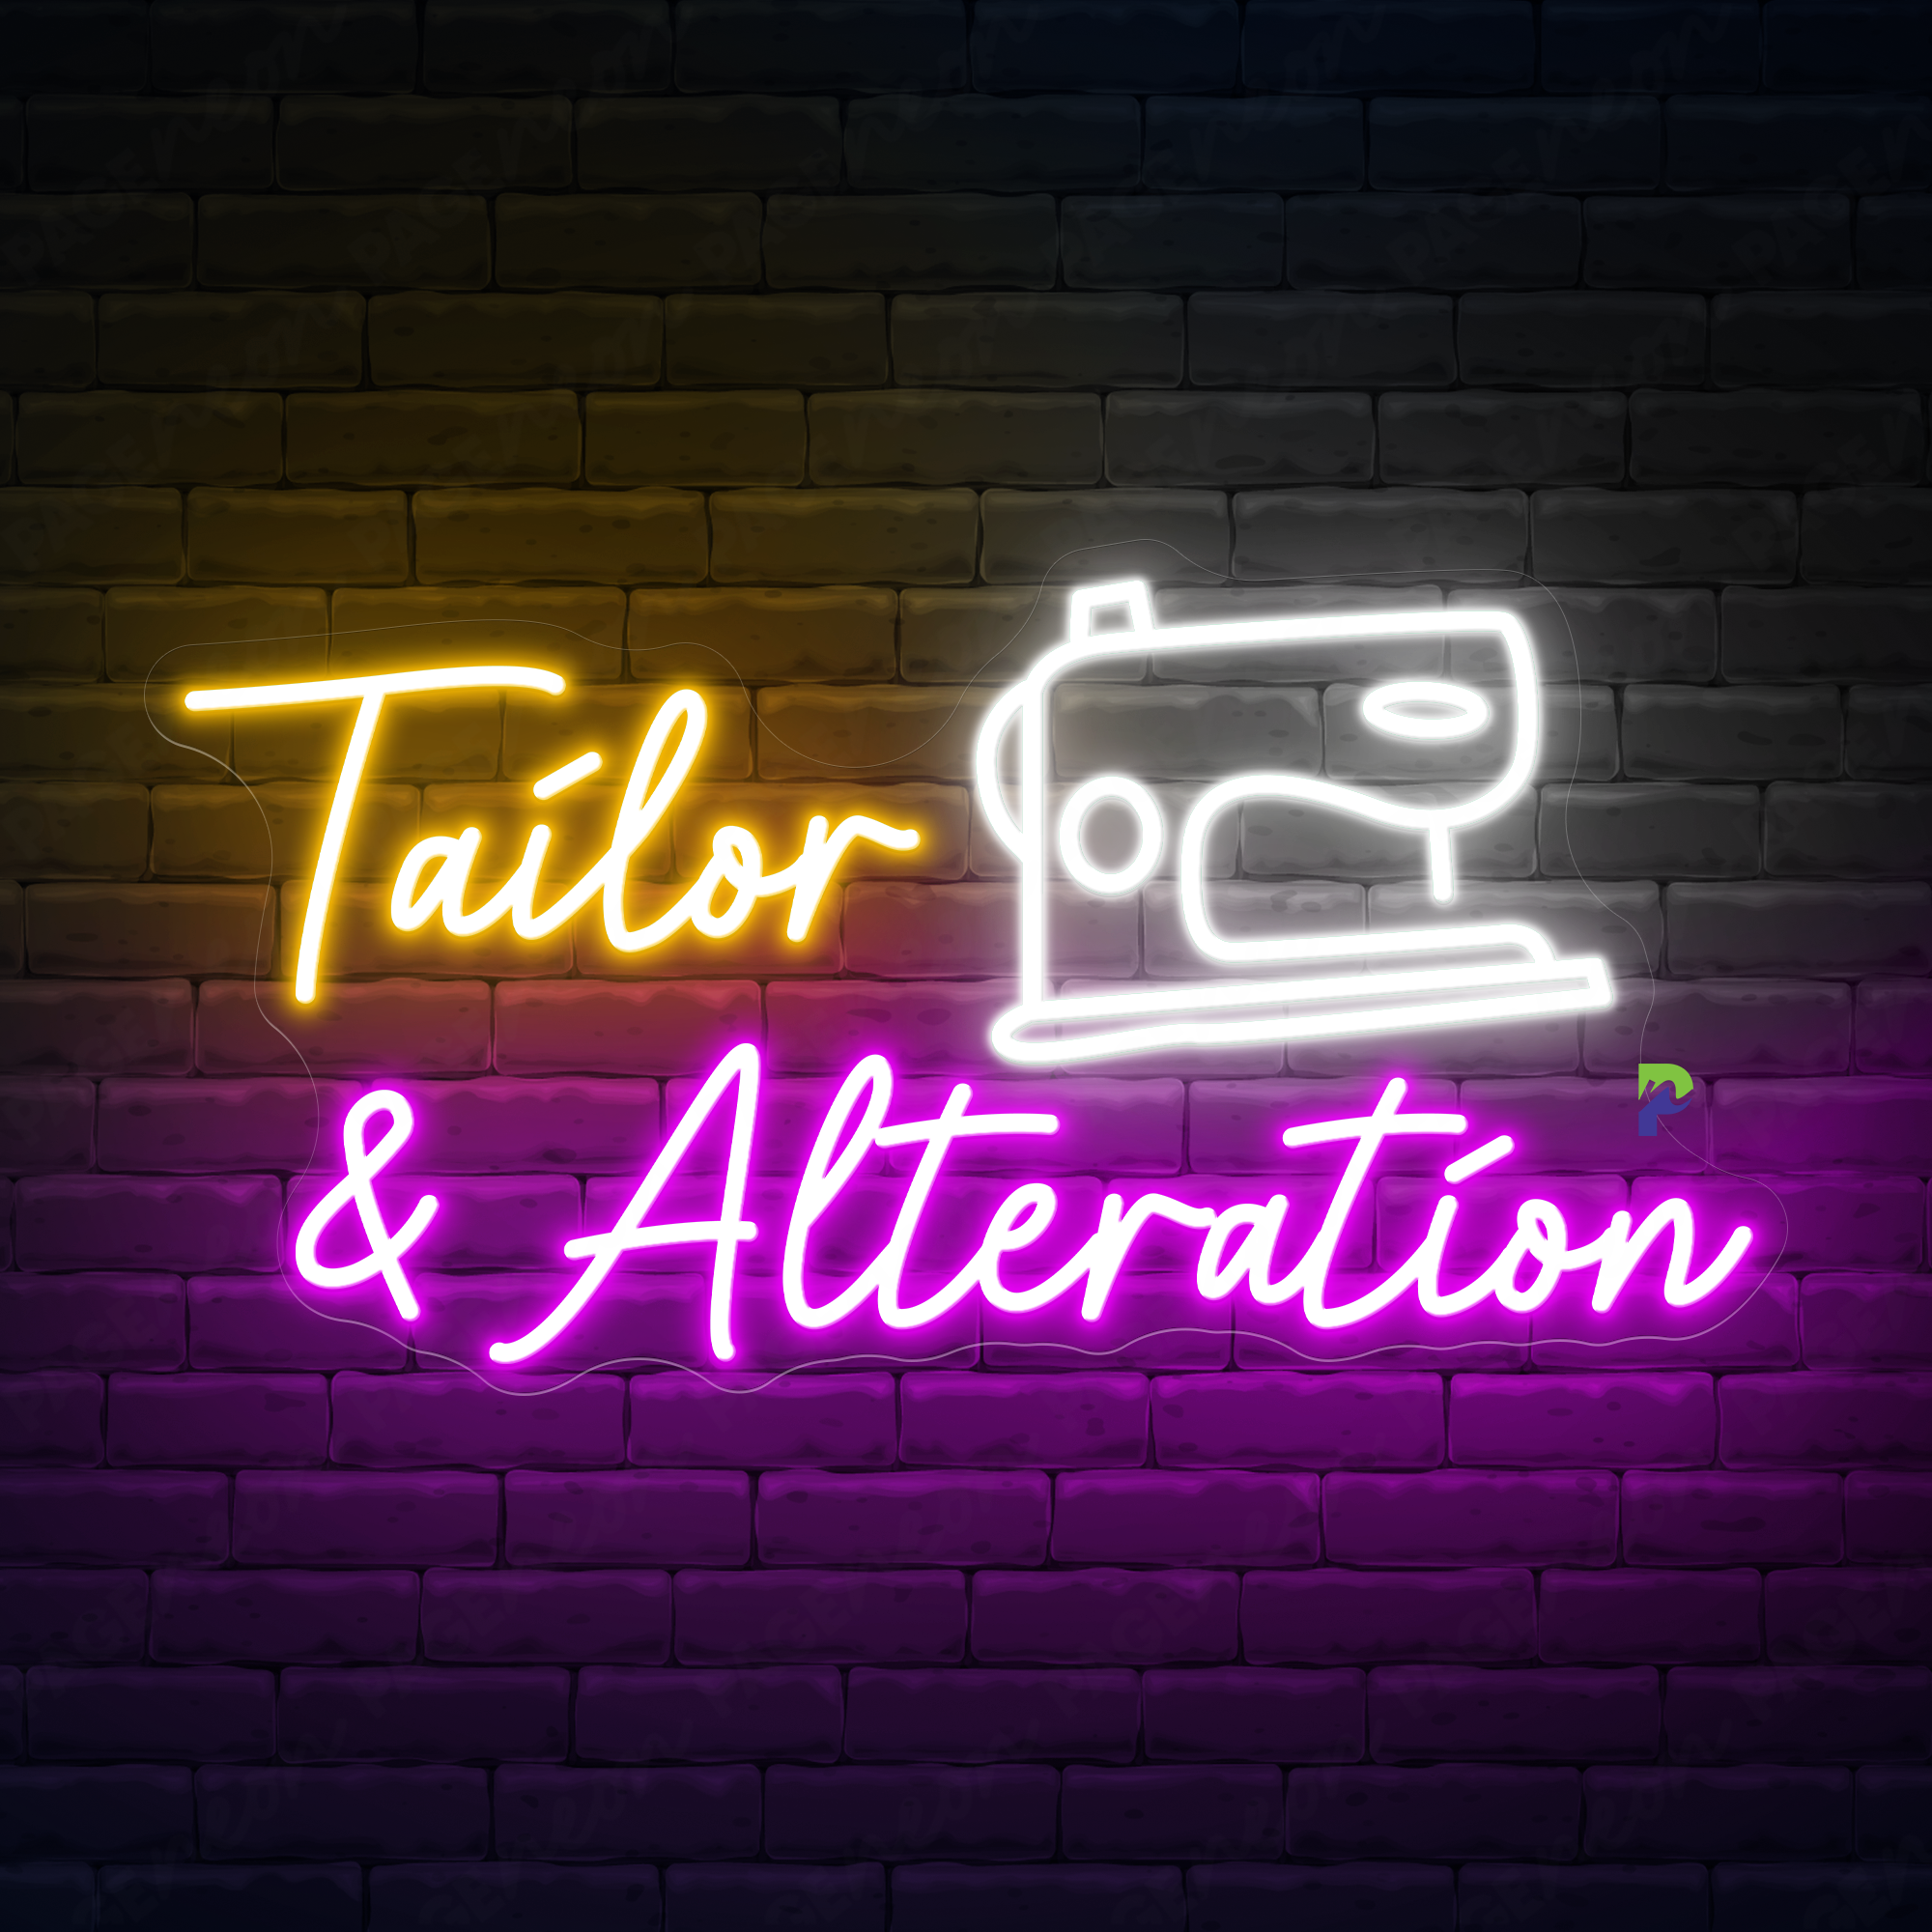 Tailor Neon Sign Alteration Led Light